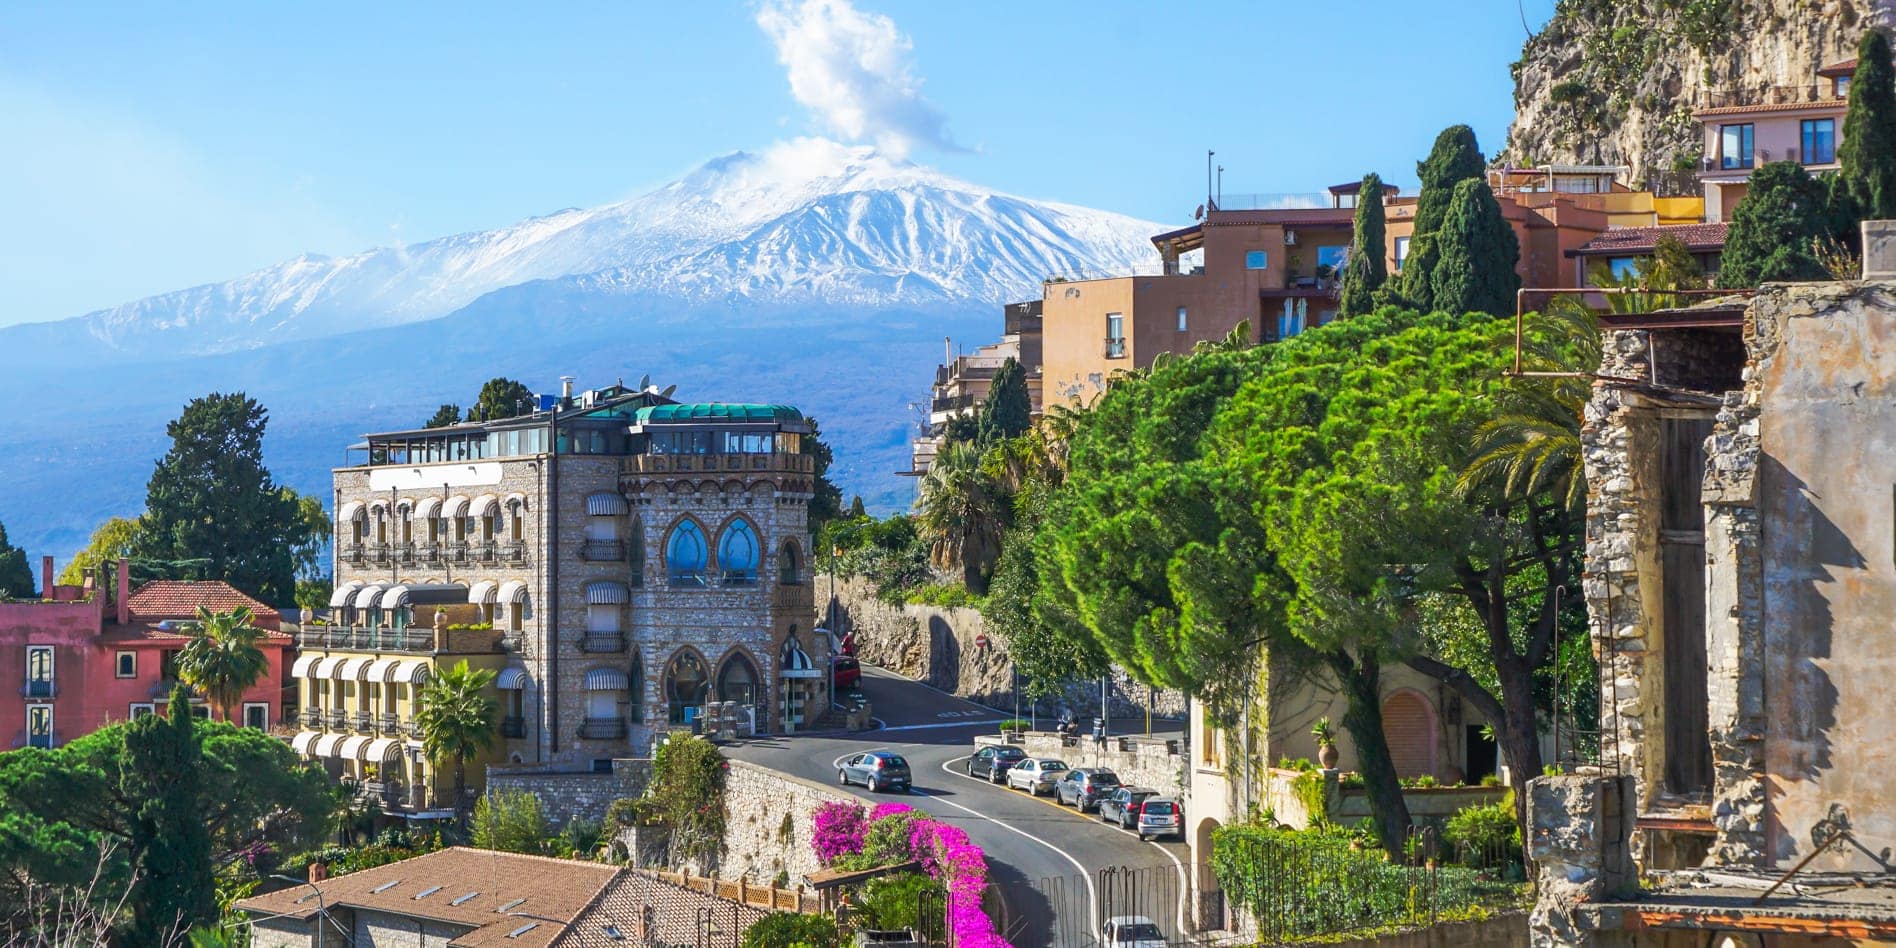 Taormina, Sicily with Mt Etna in background